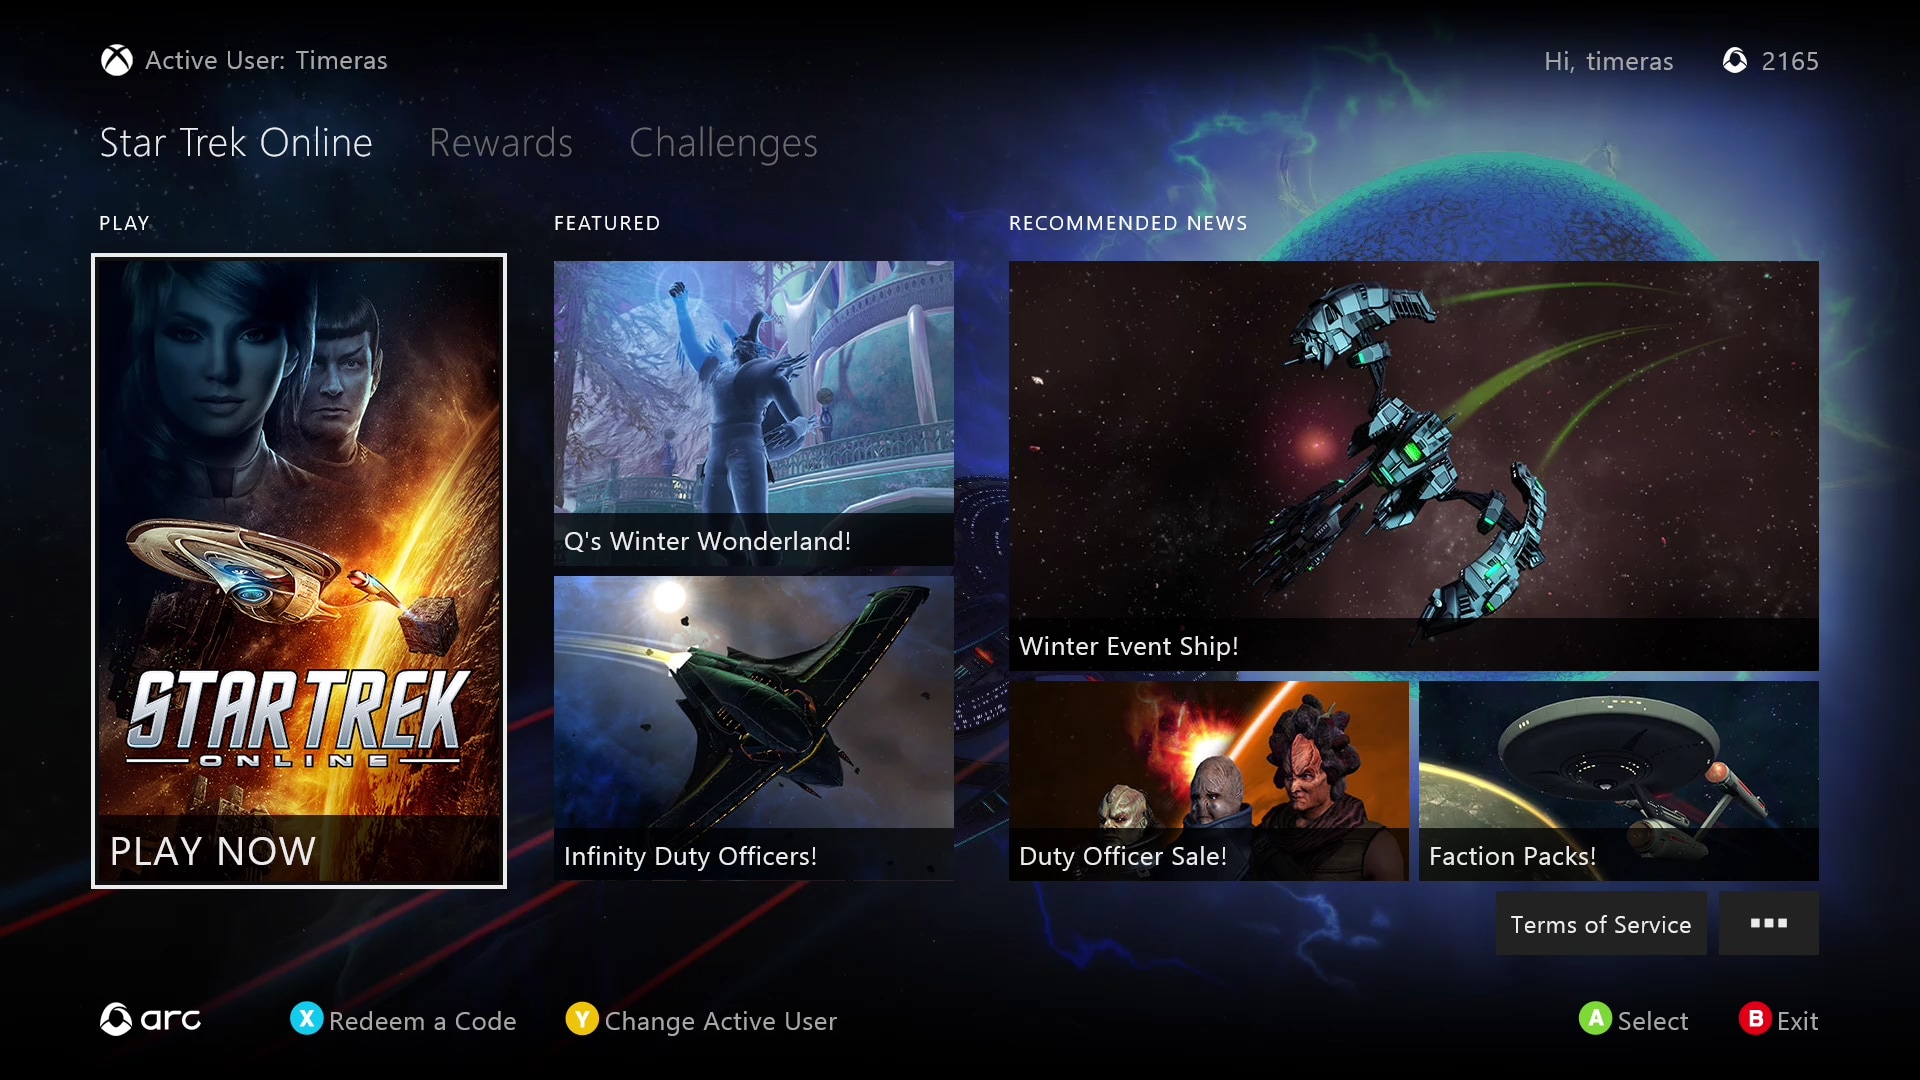 How to Install and Use the Arc App on Xbox One Star Trek Online